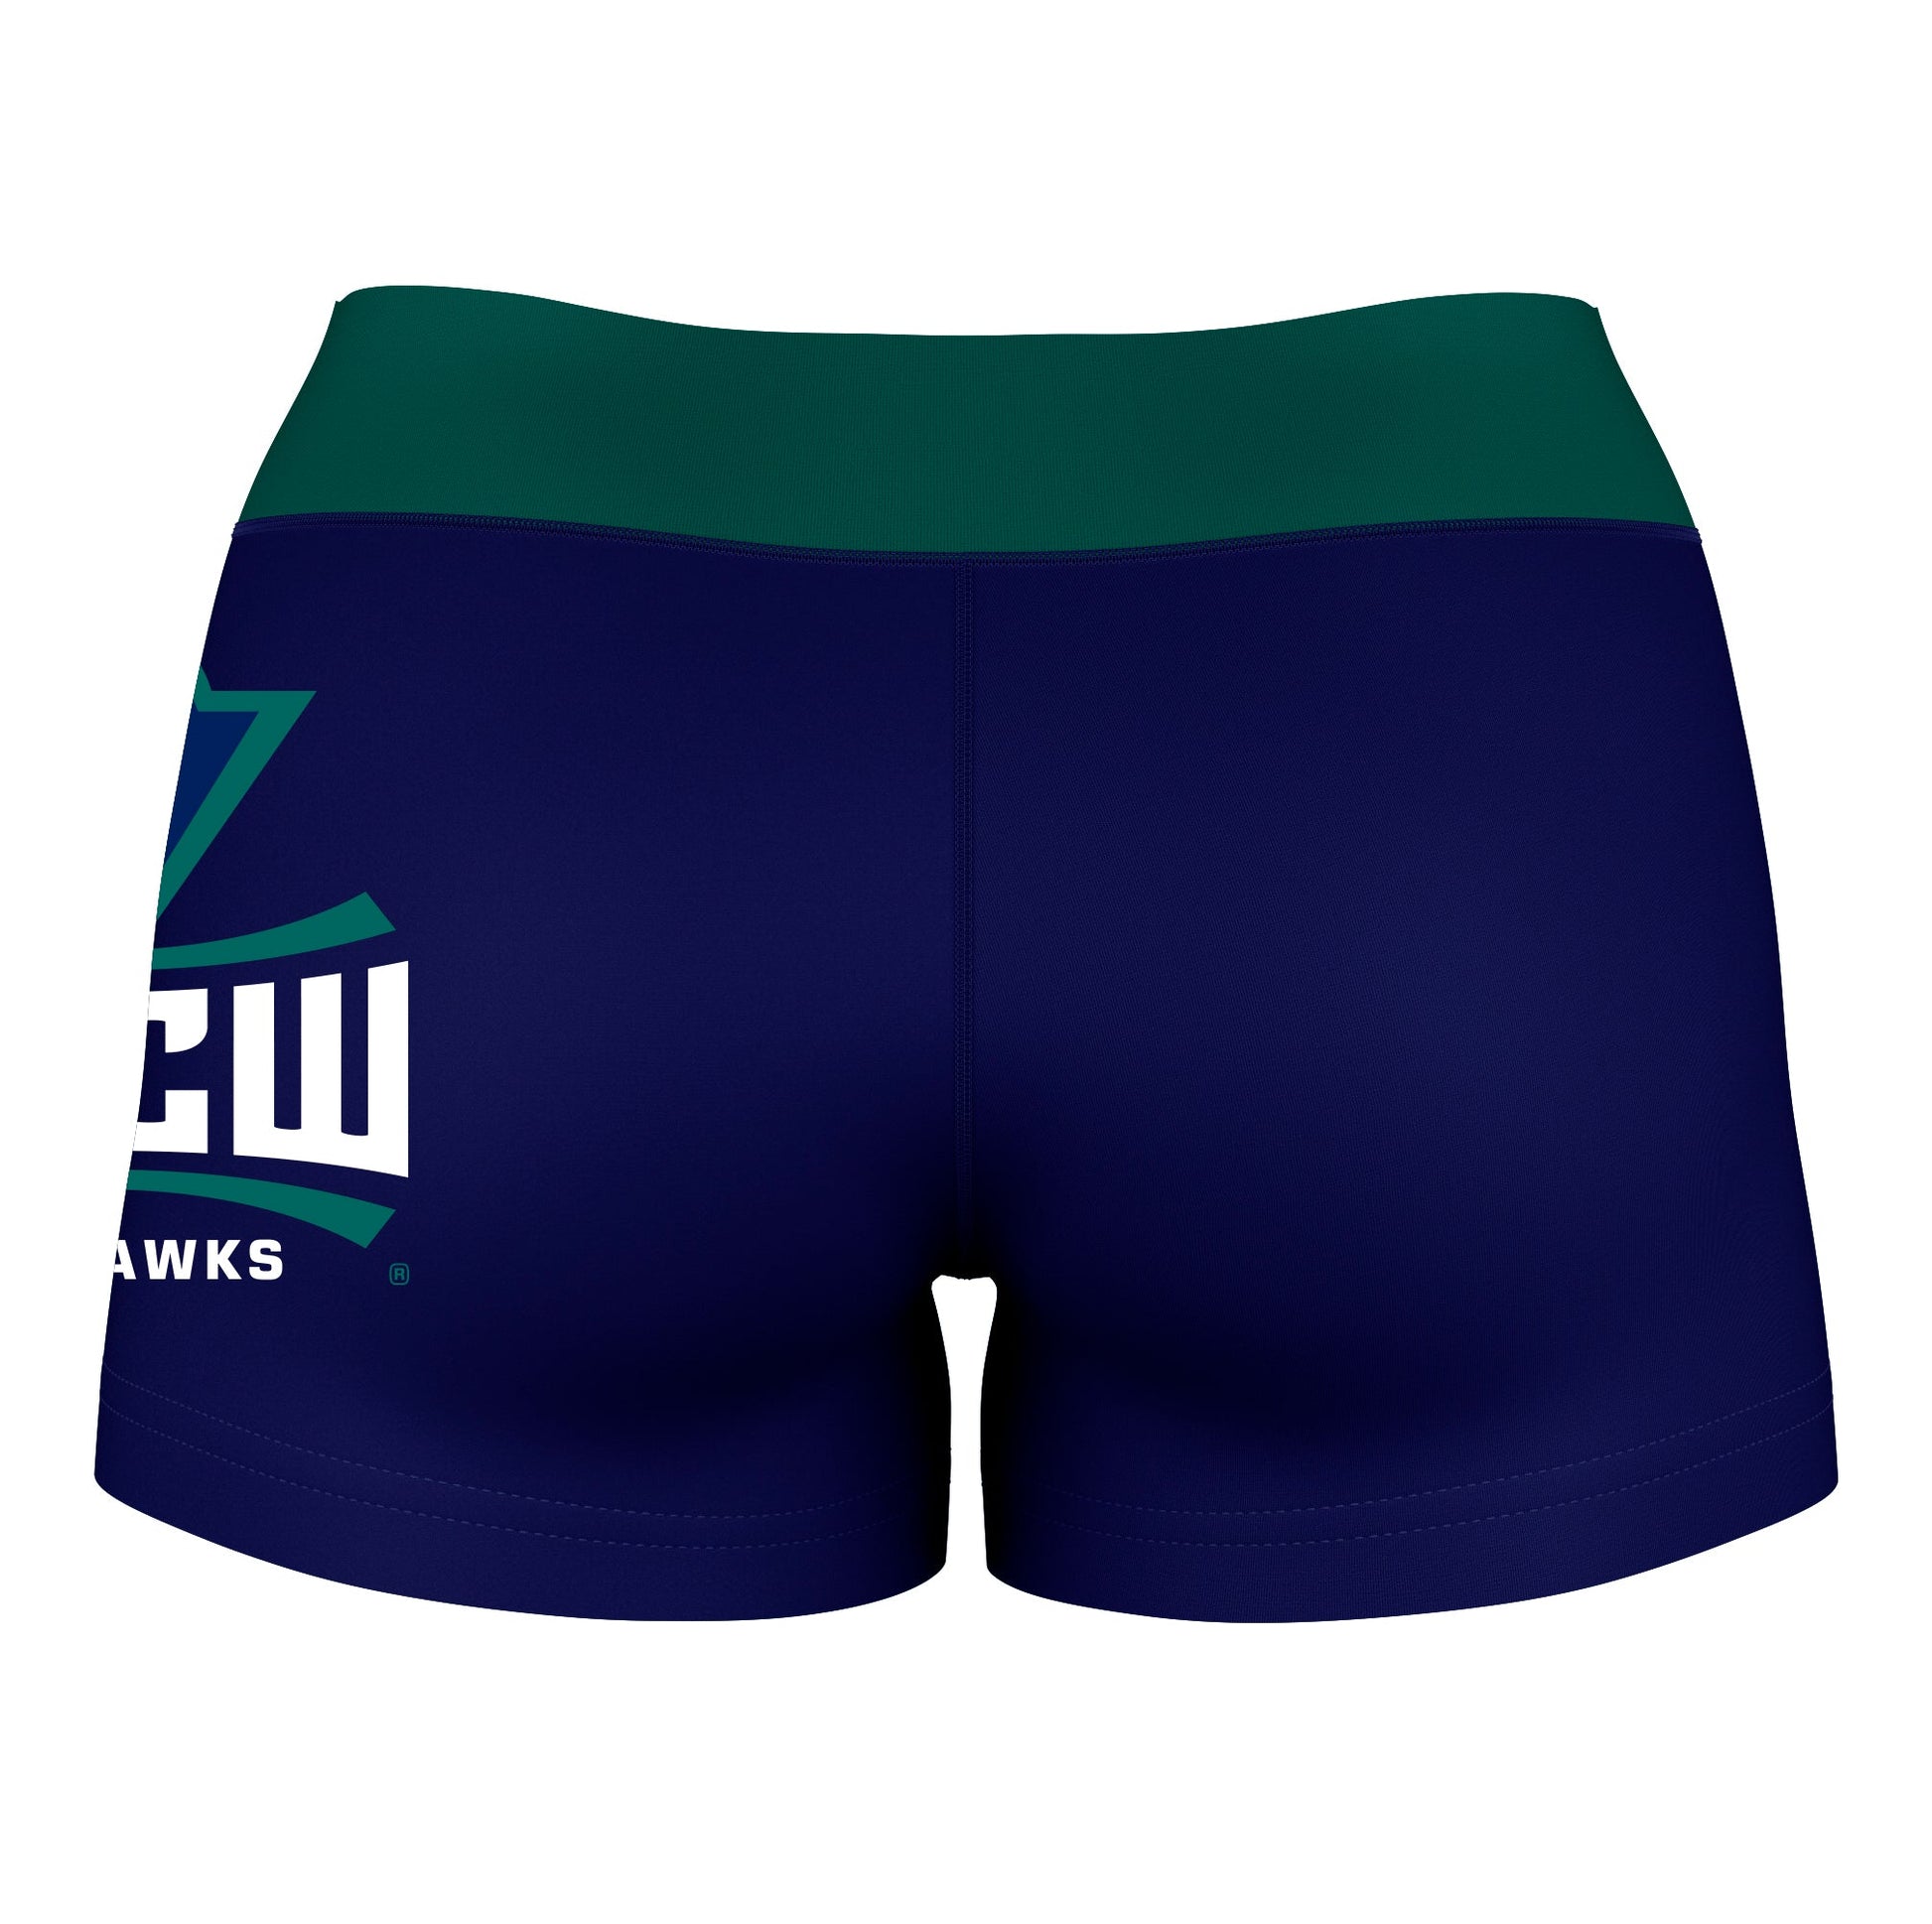 UNC Wilmington Seahawks UNCW  Logo on Thigh & Waistband Blue Teal Women Yoga Booty Workout Shorts 3.75 Inseam - Vive La F̻te - Online Apparel Store